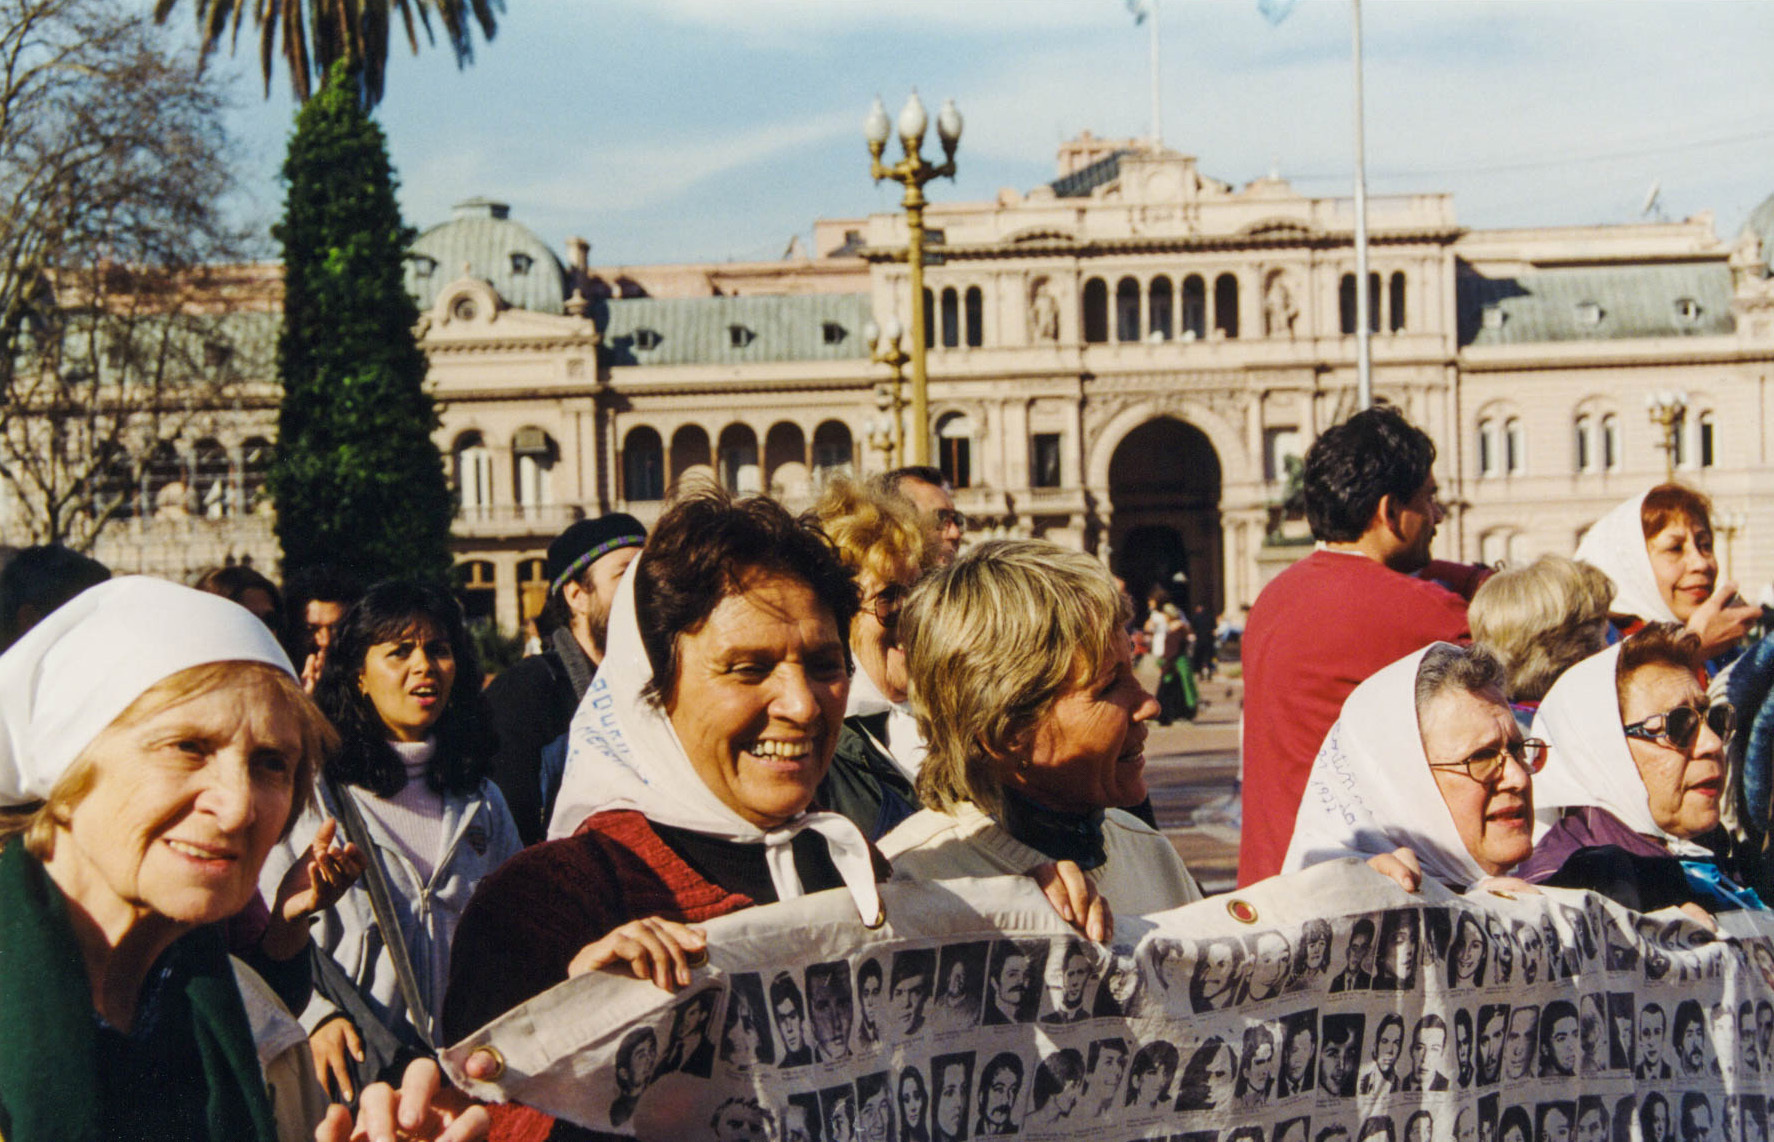 <p>Members of the Madres de la Plaza de Mayo carry a banner displaying portraits of their relatives disappeared by Argentina's military junta of 1976-1983. <br /></p>
<p>Mothers, grandmothers, and other relatives began these marches during the dictatorship, gathering each Thursday at the Plaza de Mayo to demand accountability and justice for their missing loved ones. Their movement adopted the name of the square. <br /></p>
<p>This photo was taken in 1999, 22 years after they had commenced their rallies. They continue marching to this day.</p>